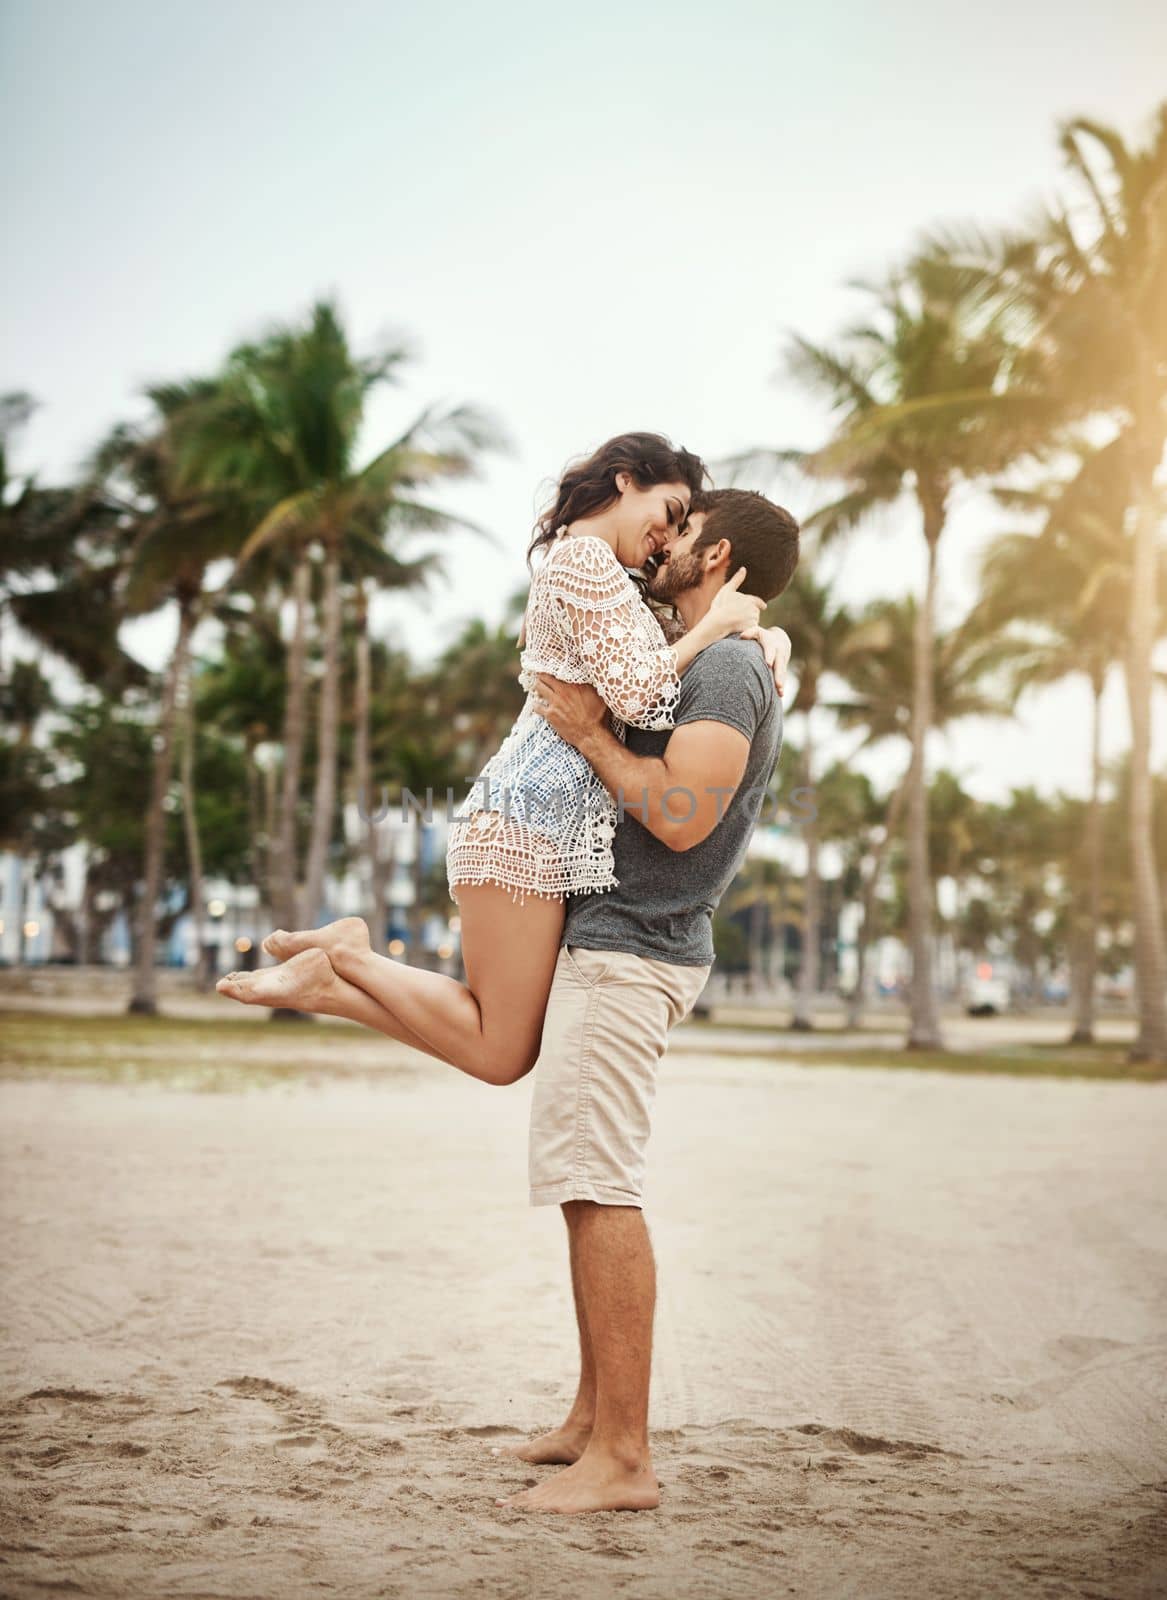 Love, lifes greatest pleasure. a young couple spending a romantic day at the beach